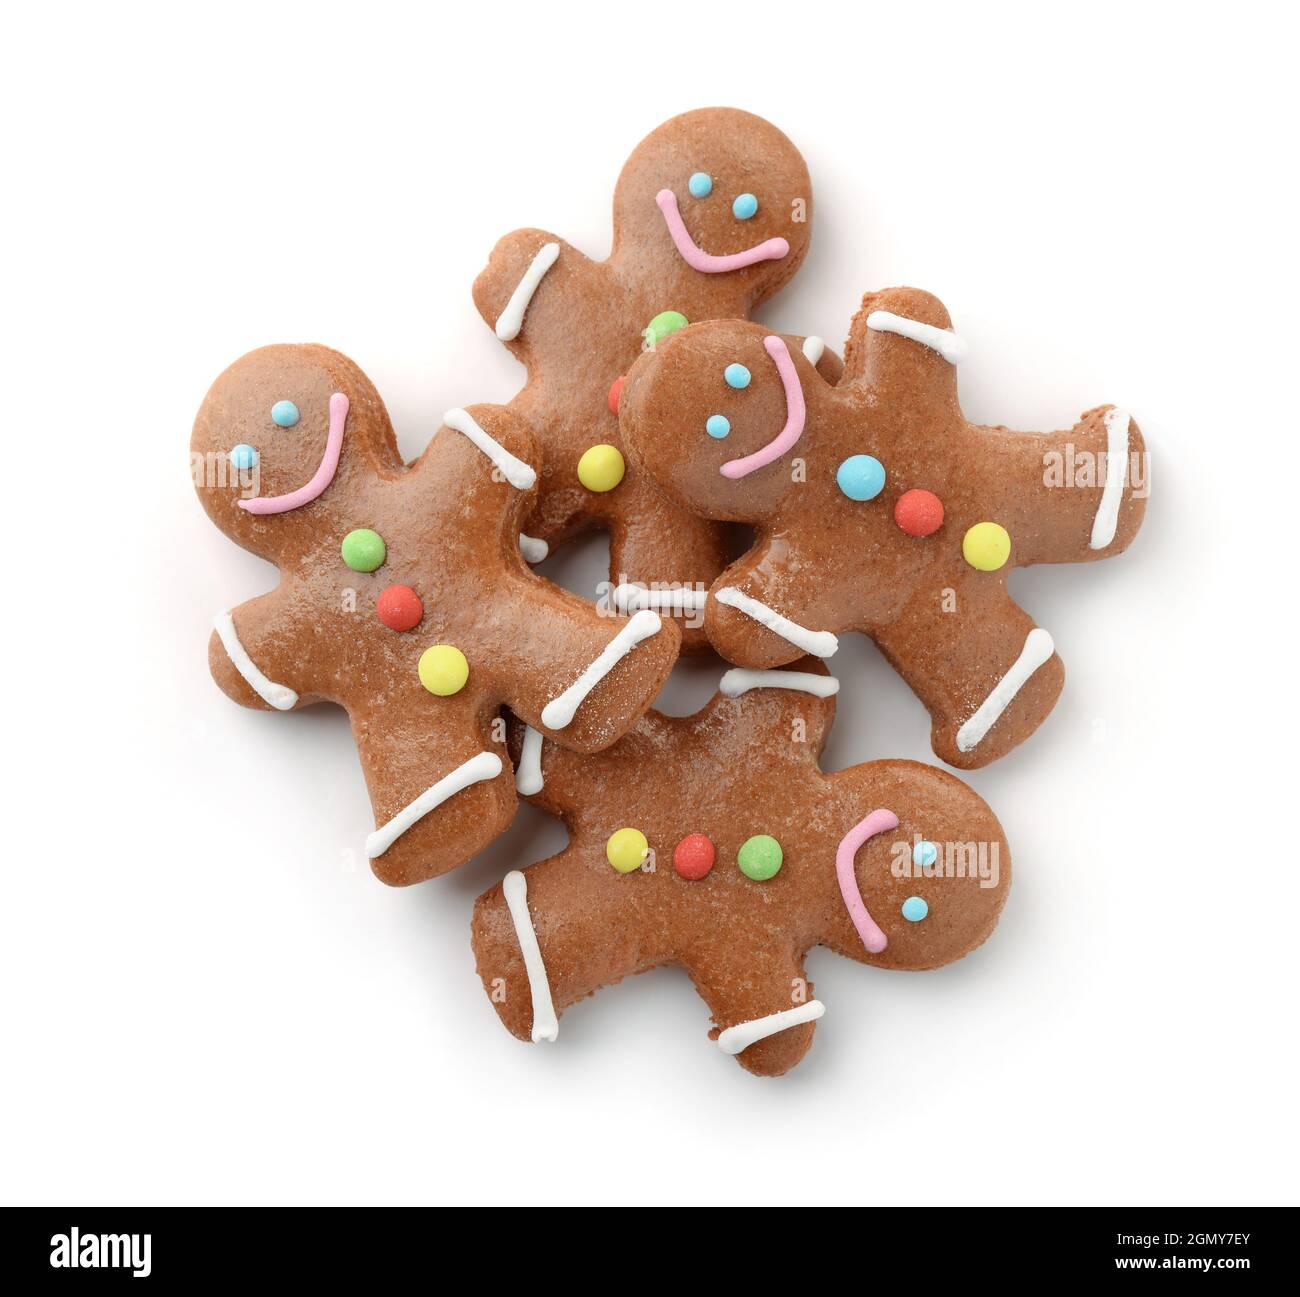 Top view of several gingerbread men isolated on white Stock Photo